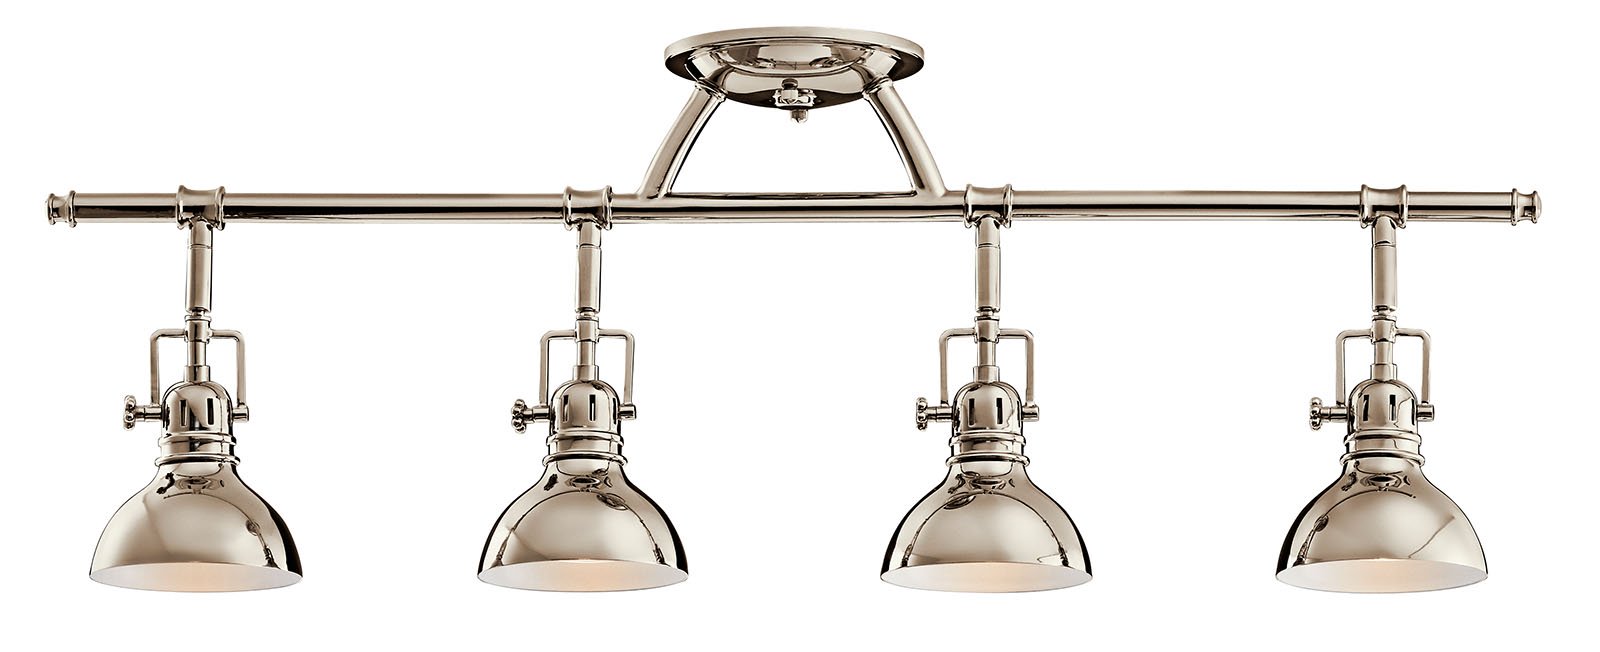 Constructed from steel, this refined 4 light fixed rail fixture features a Polished Nickel finish to subtly enhance any space.